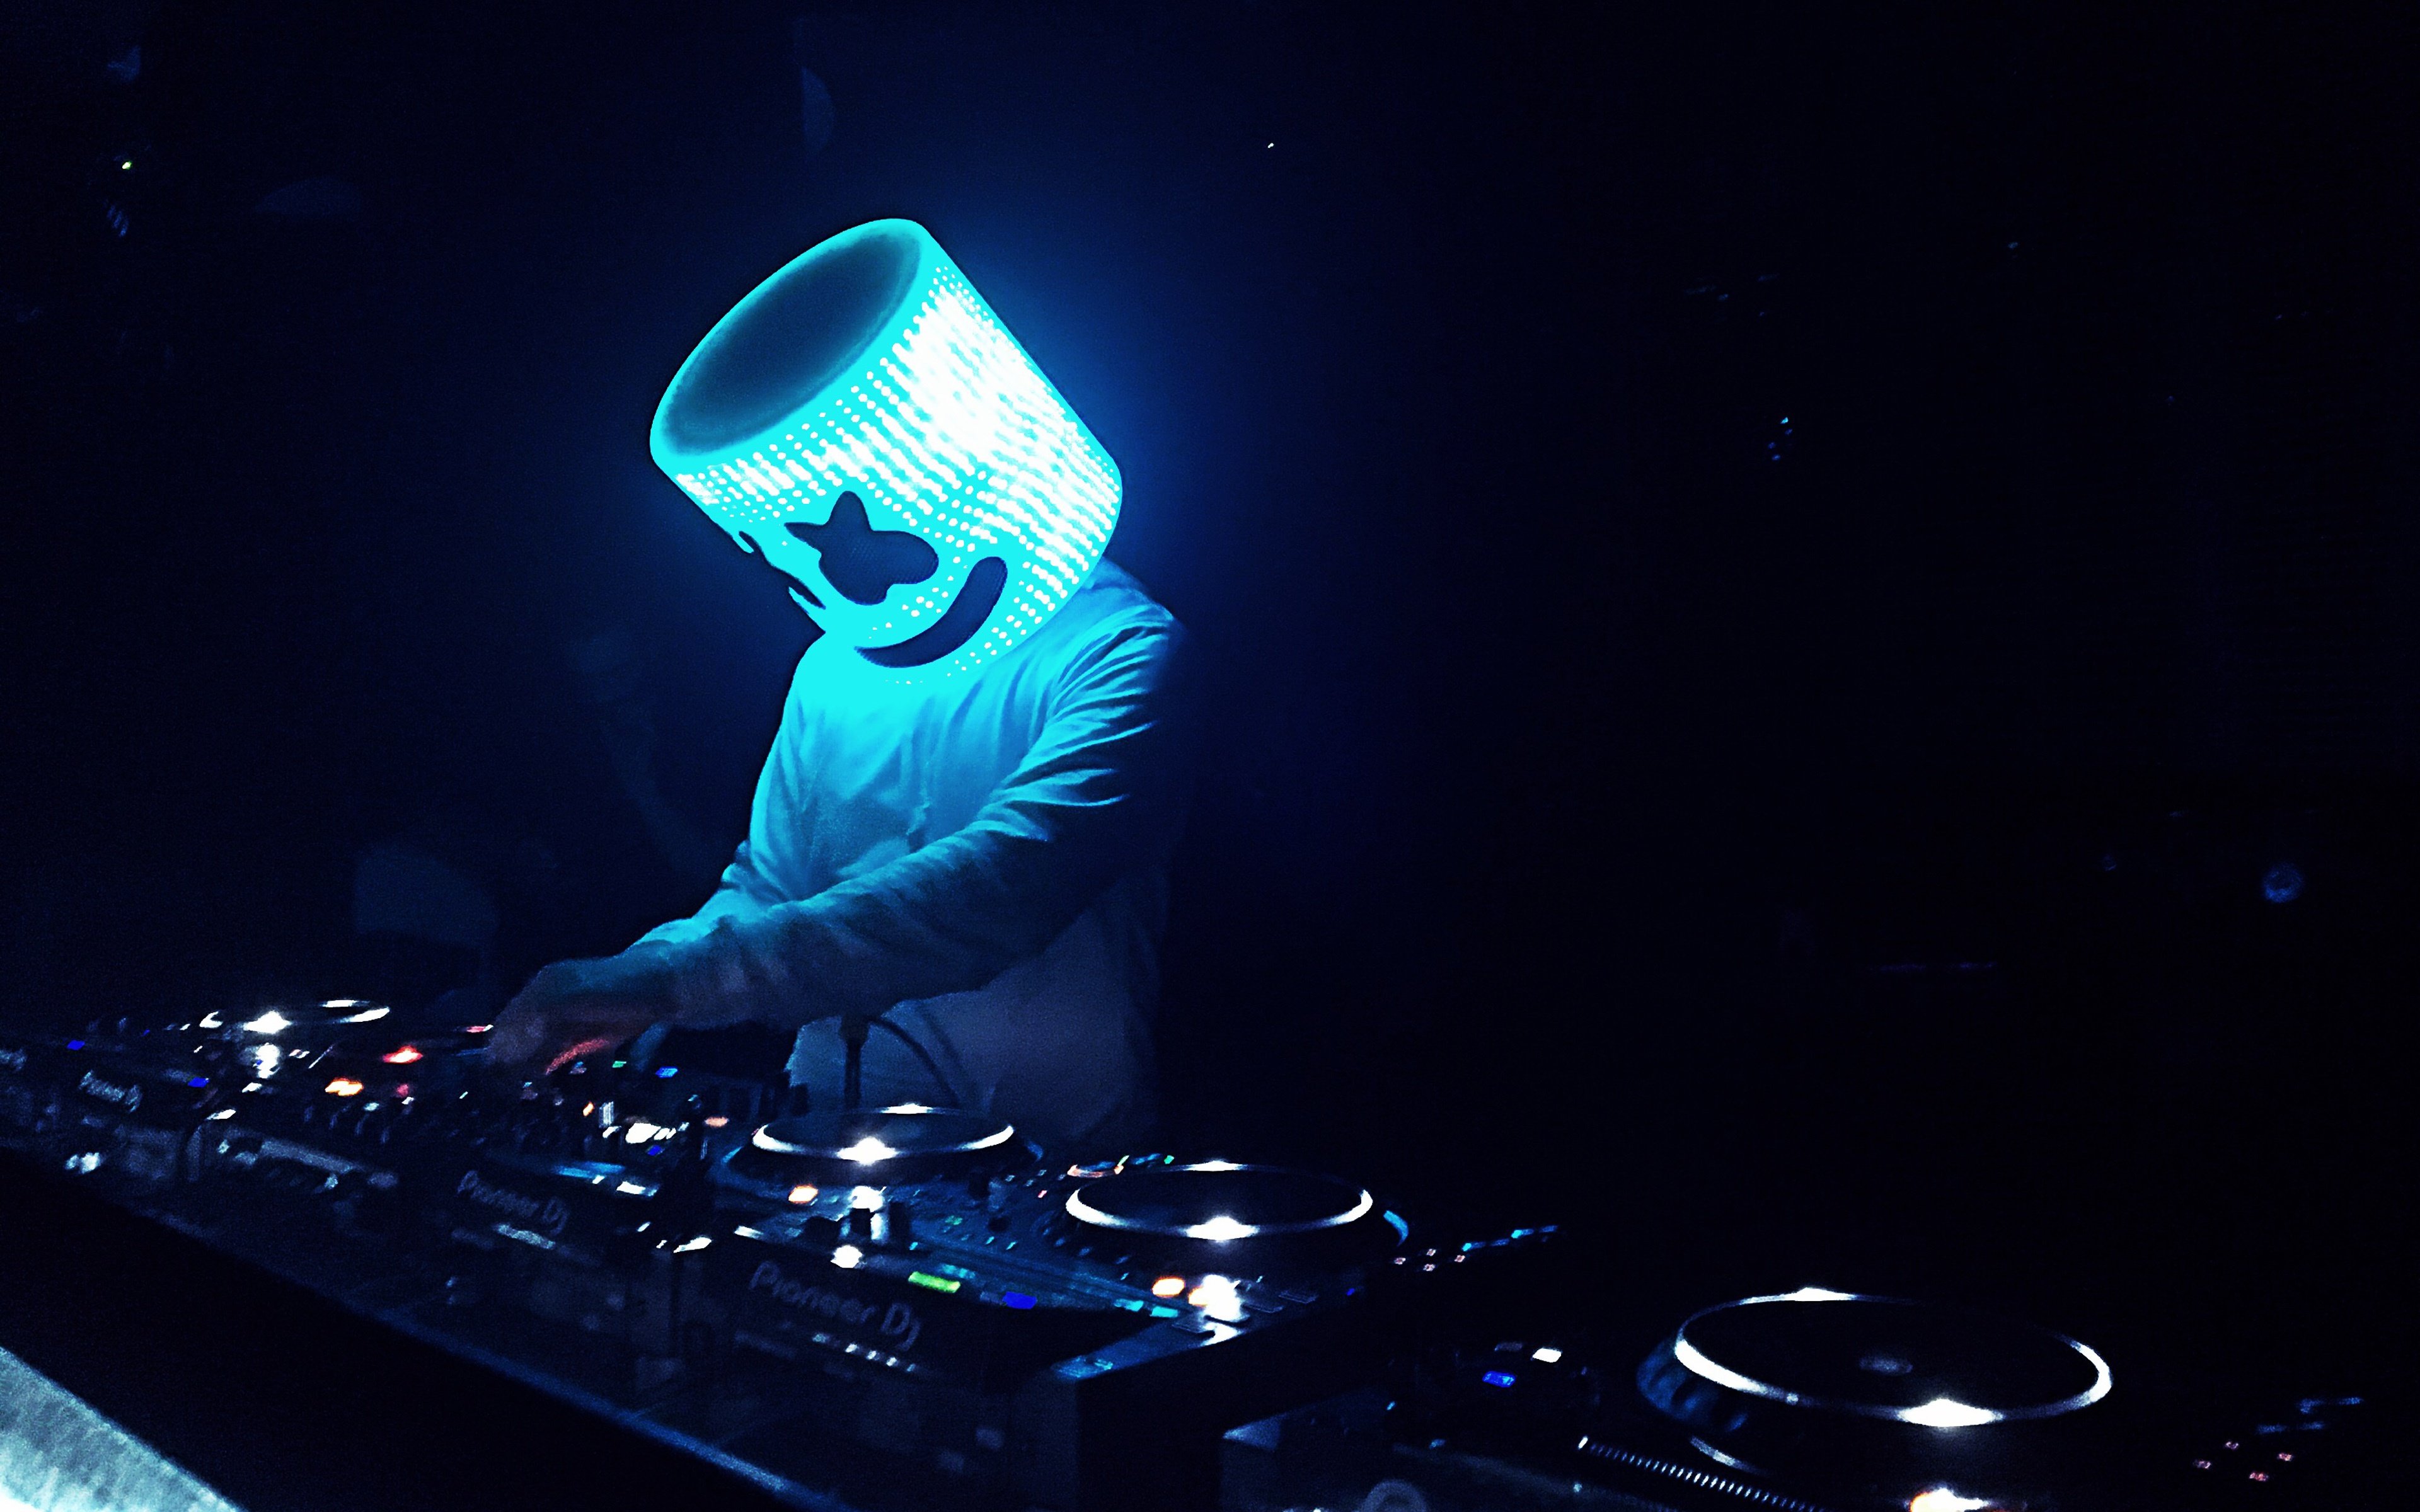 Download wallpaper DJ Marshmello, EDM, party, blue neon light, electronic music, Chris Comstock, DJ console for desktop with resolution 3840x2400. High Quality HD picture wallpaper